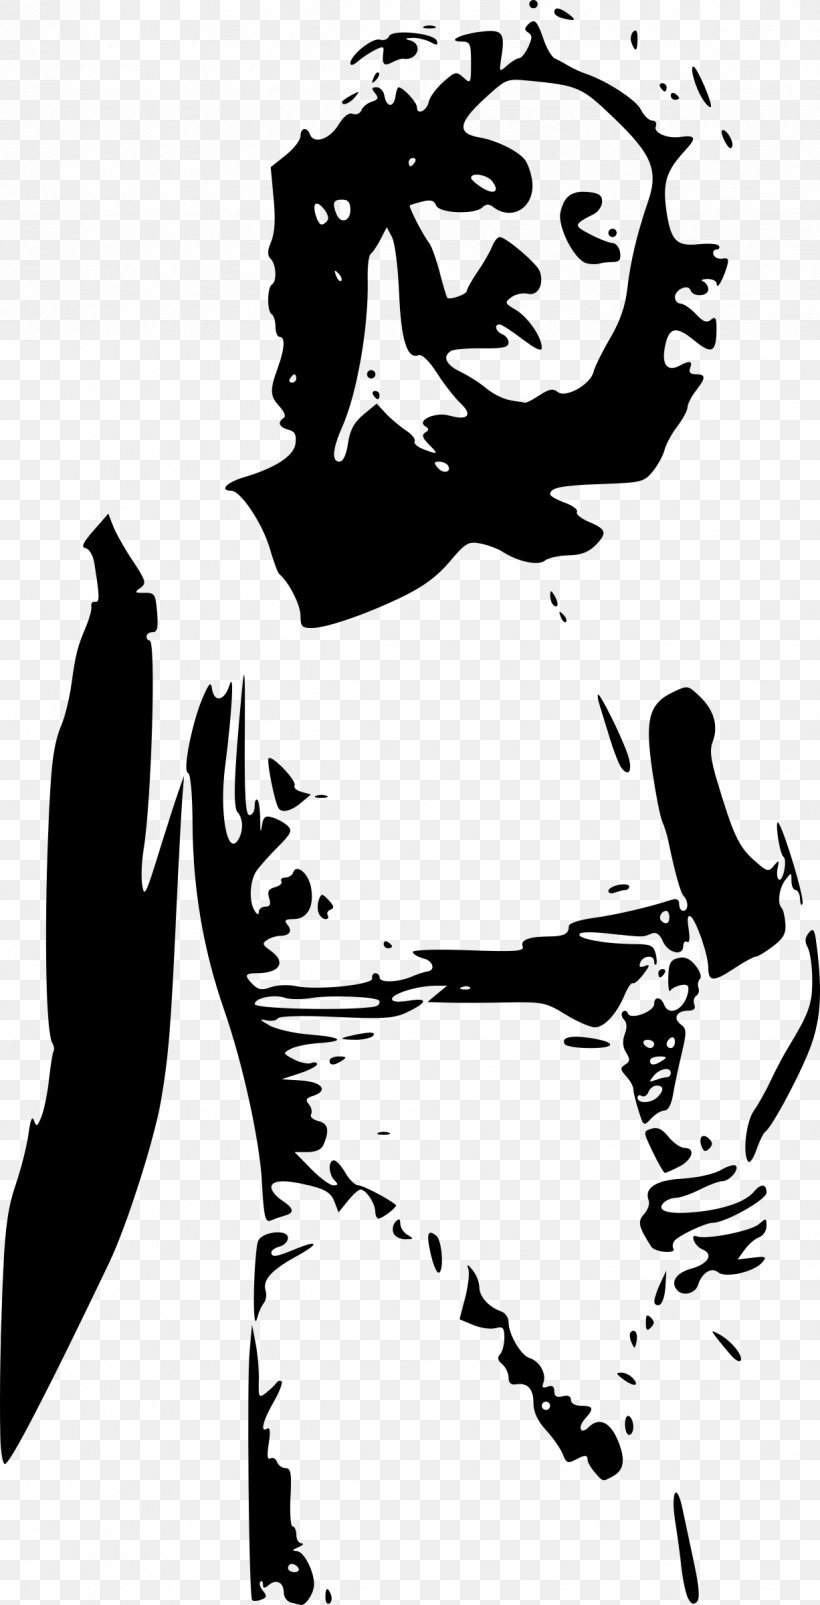 The Taming Of The Shrew Silhouette Queen Of Hearts Clip Art, PNG, 1226x2400px, Taming Of The Shrew, Art, Artwork, Black, Black And White Download Free